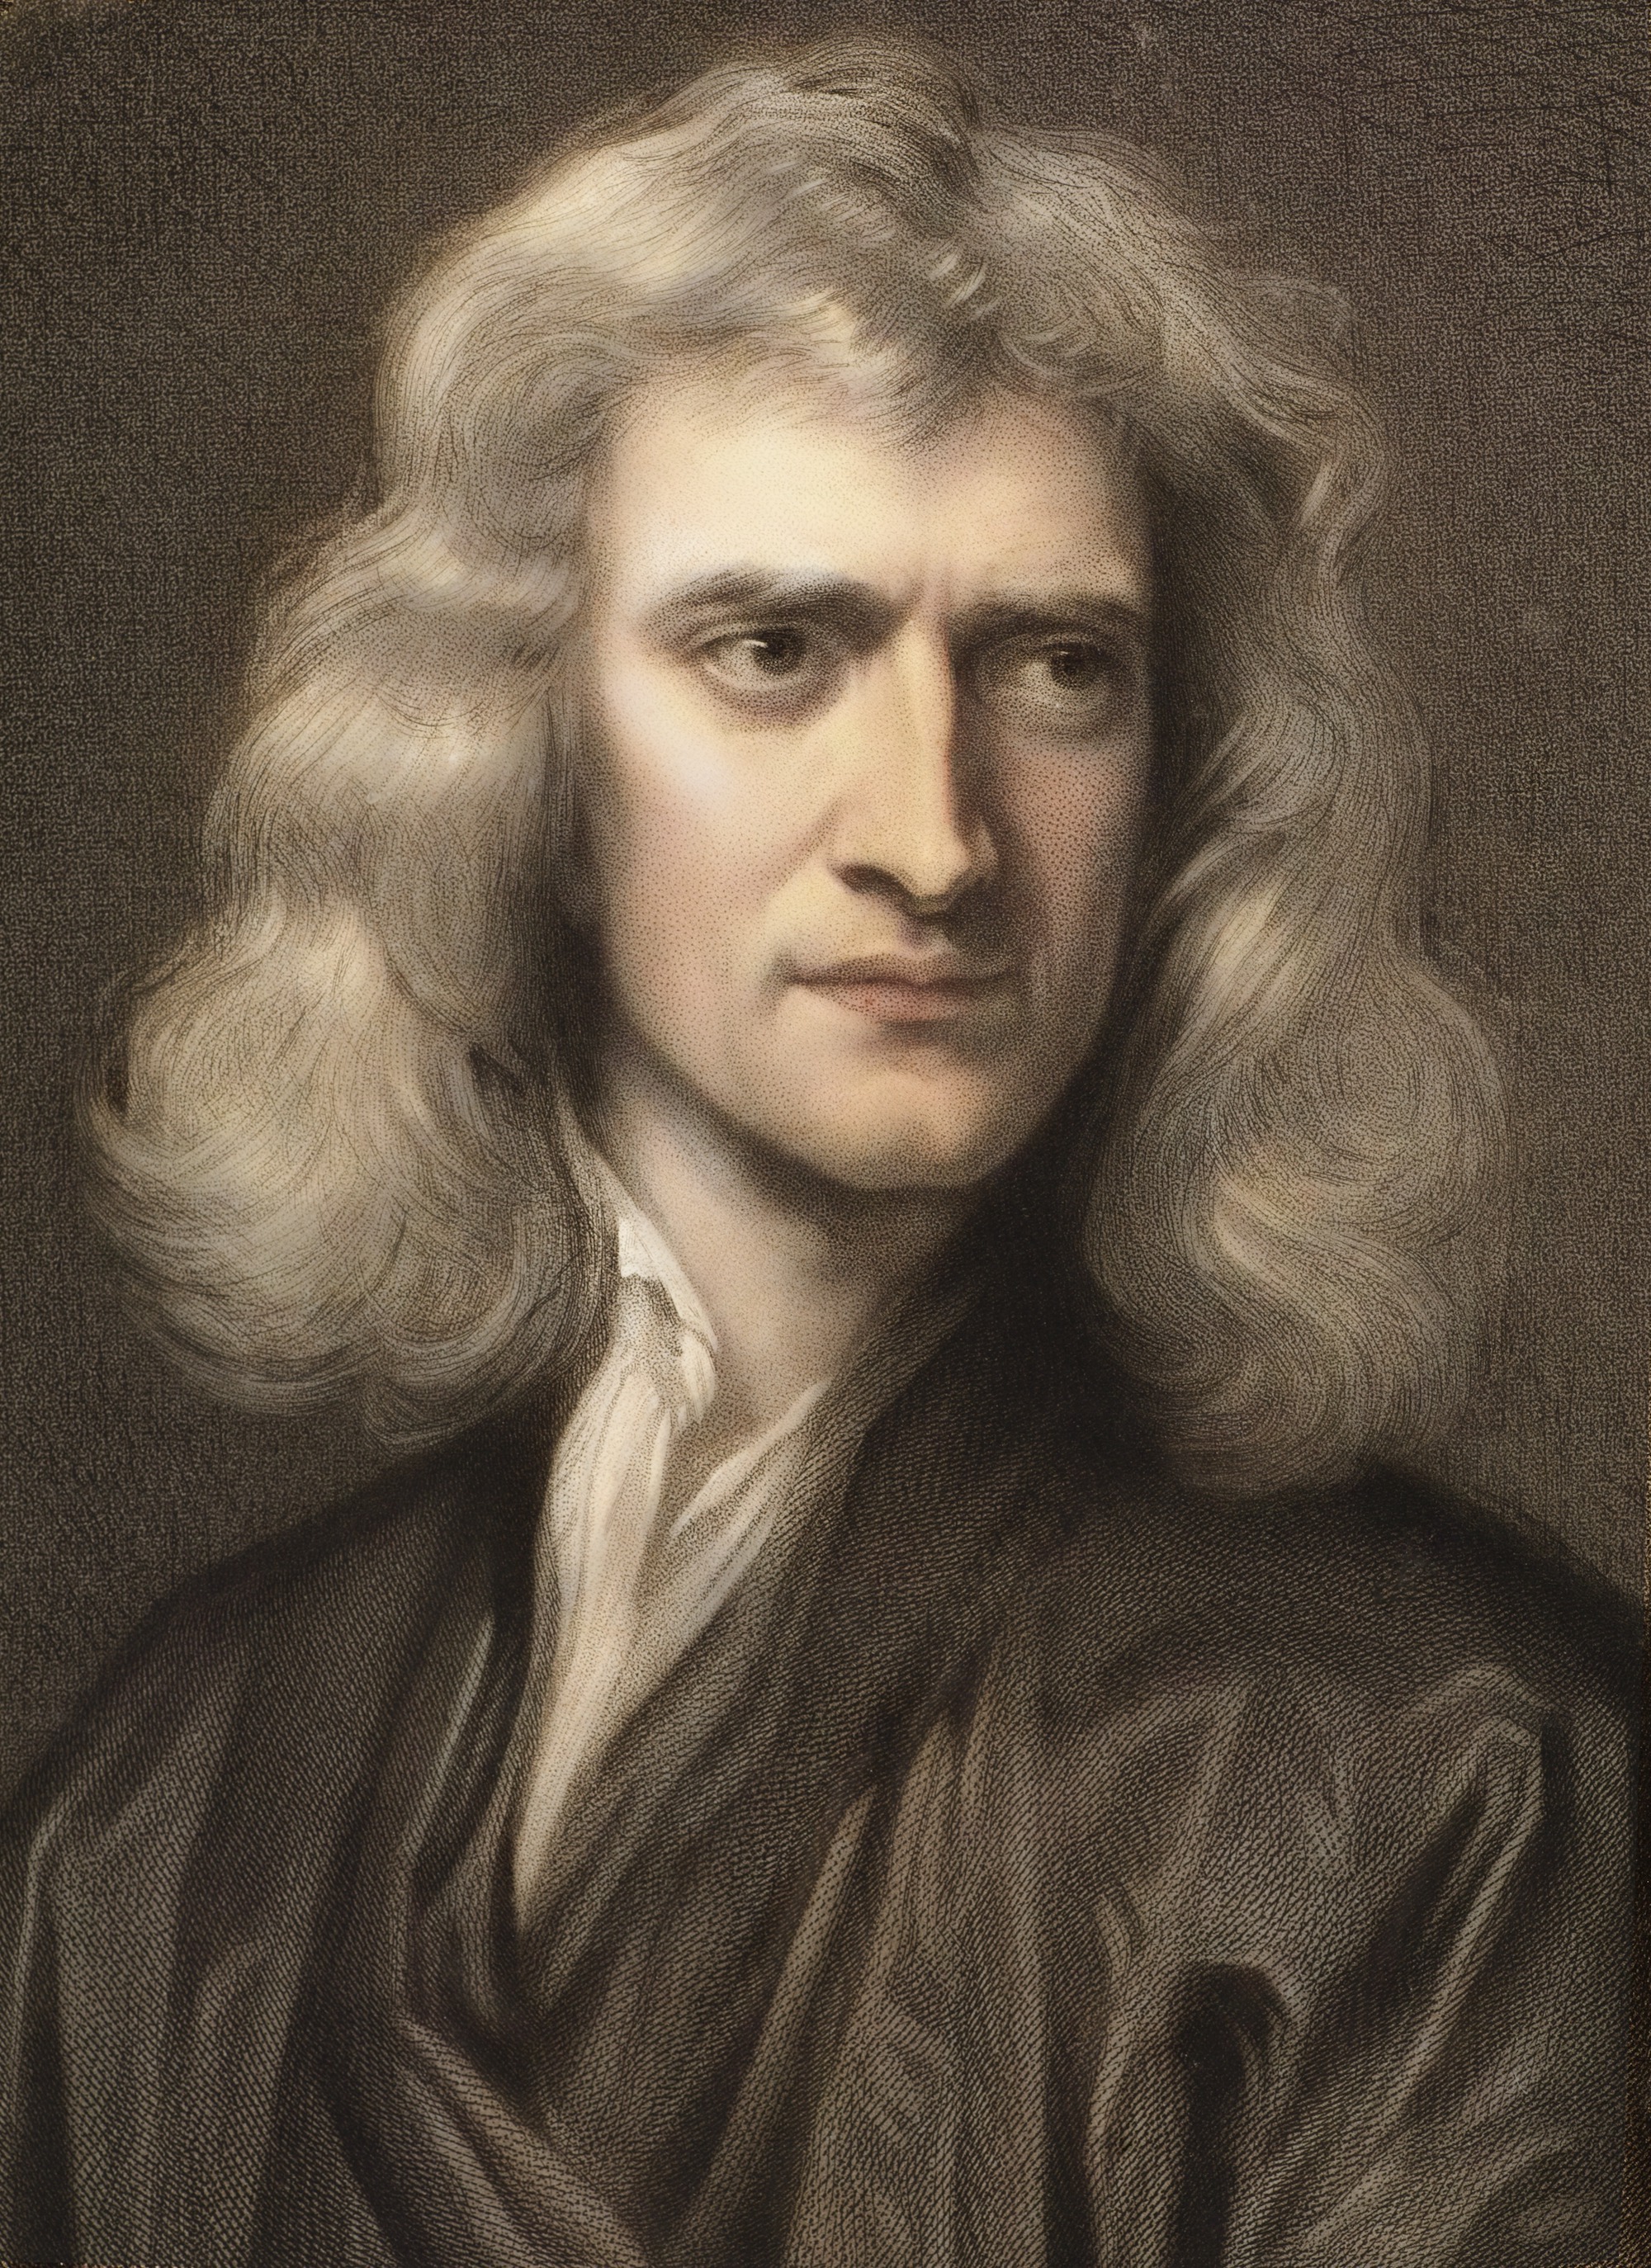 During the 18 months of the Great Plague (1665-1666), Isaac Newton conceived calculus, set foundations for his theory of light and color, theory of gravity, worked on laws of planetary motion and wrote many papers creating the foundations of early calculus.